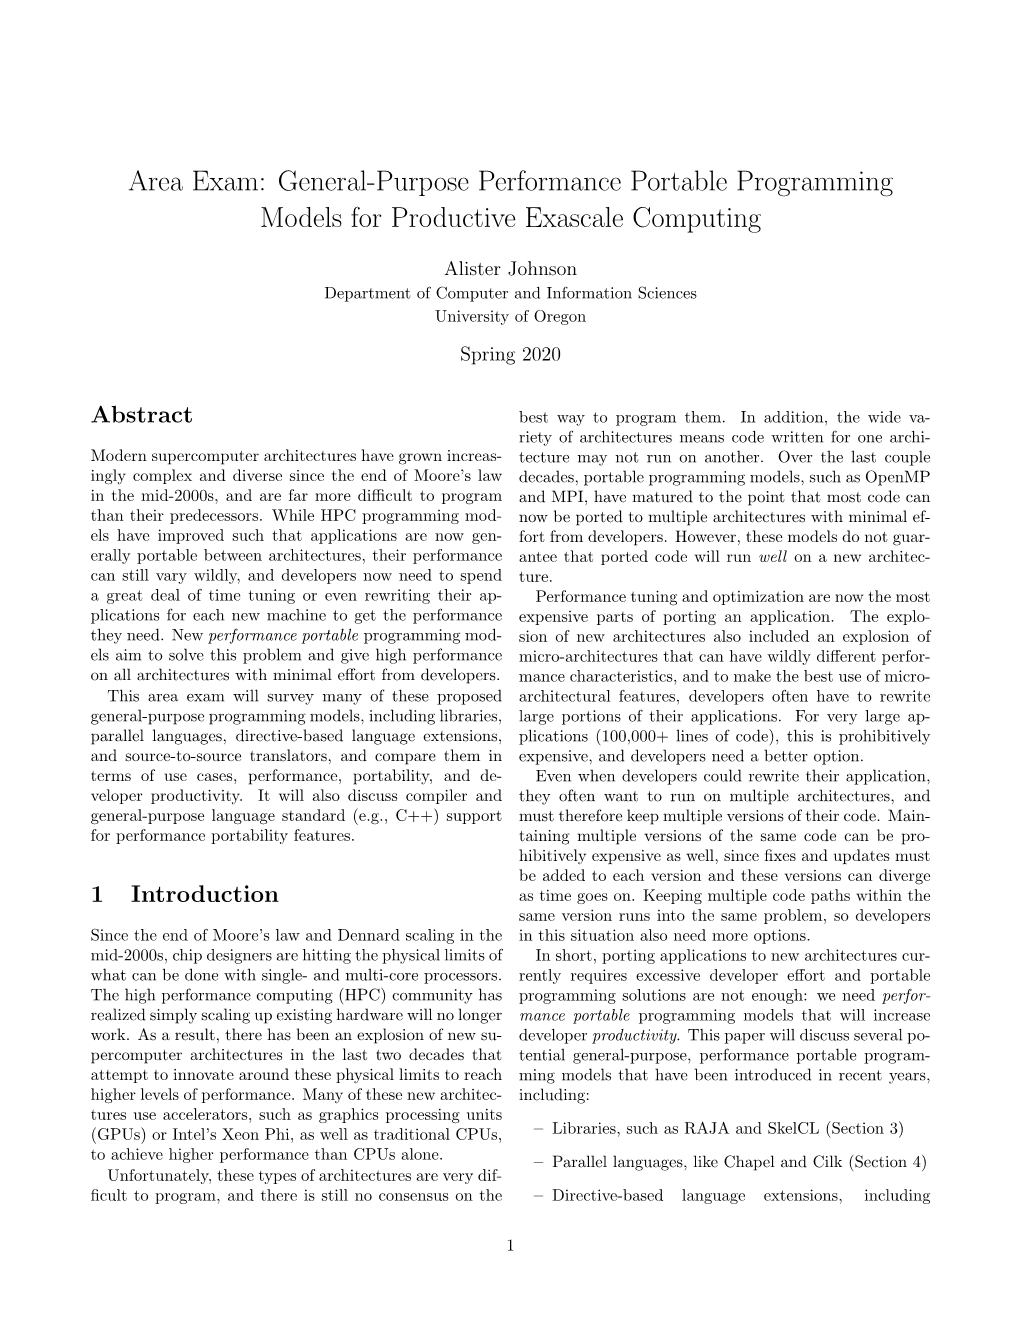 General-Purpose Performance Portable Programming Models for Productive Exascale Computing